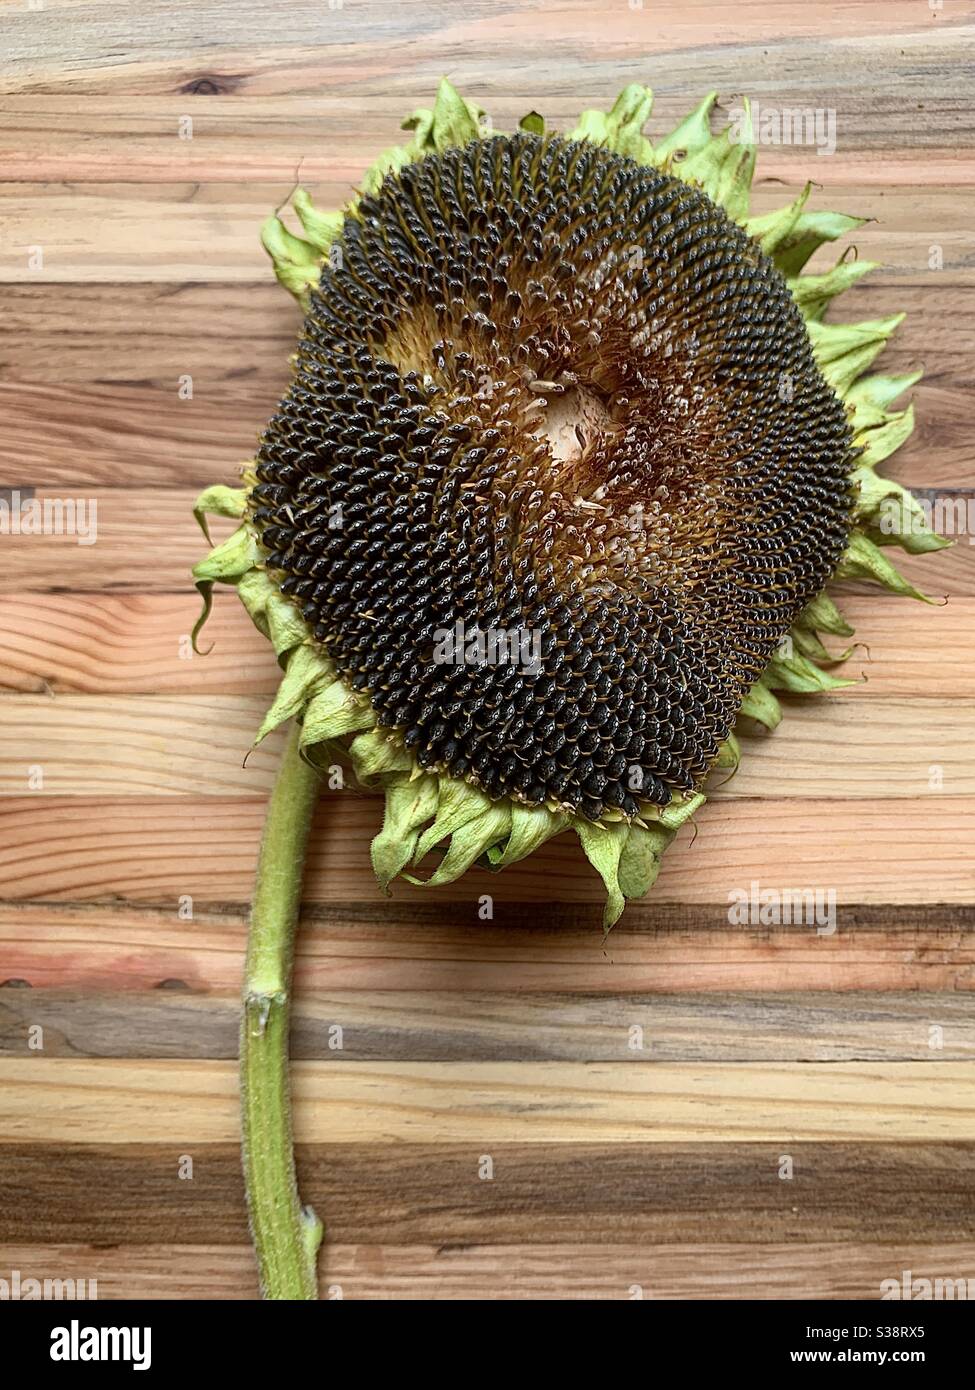 Dried out sunflower head Stock Photo